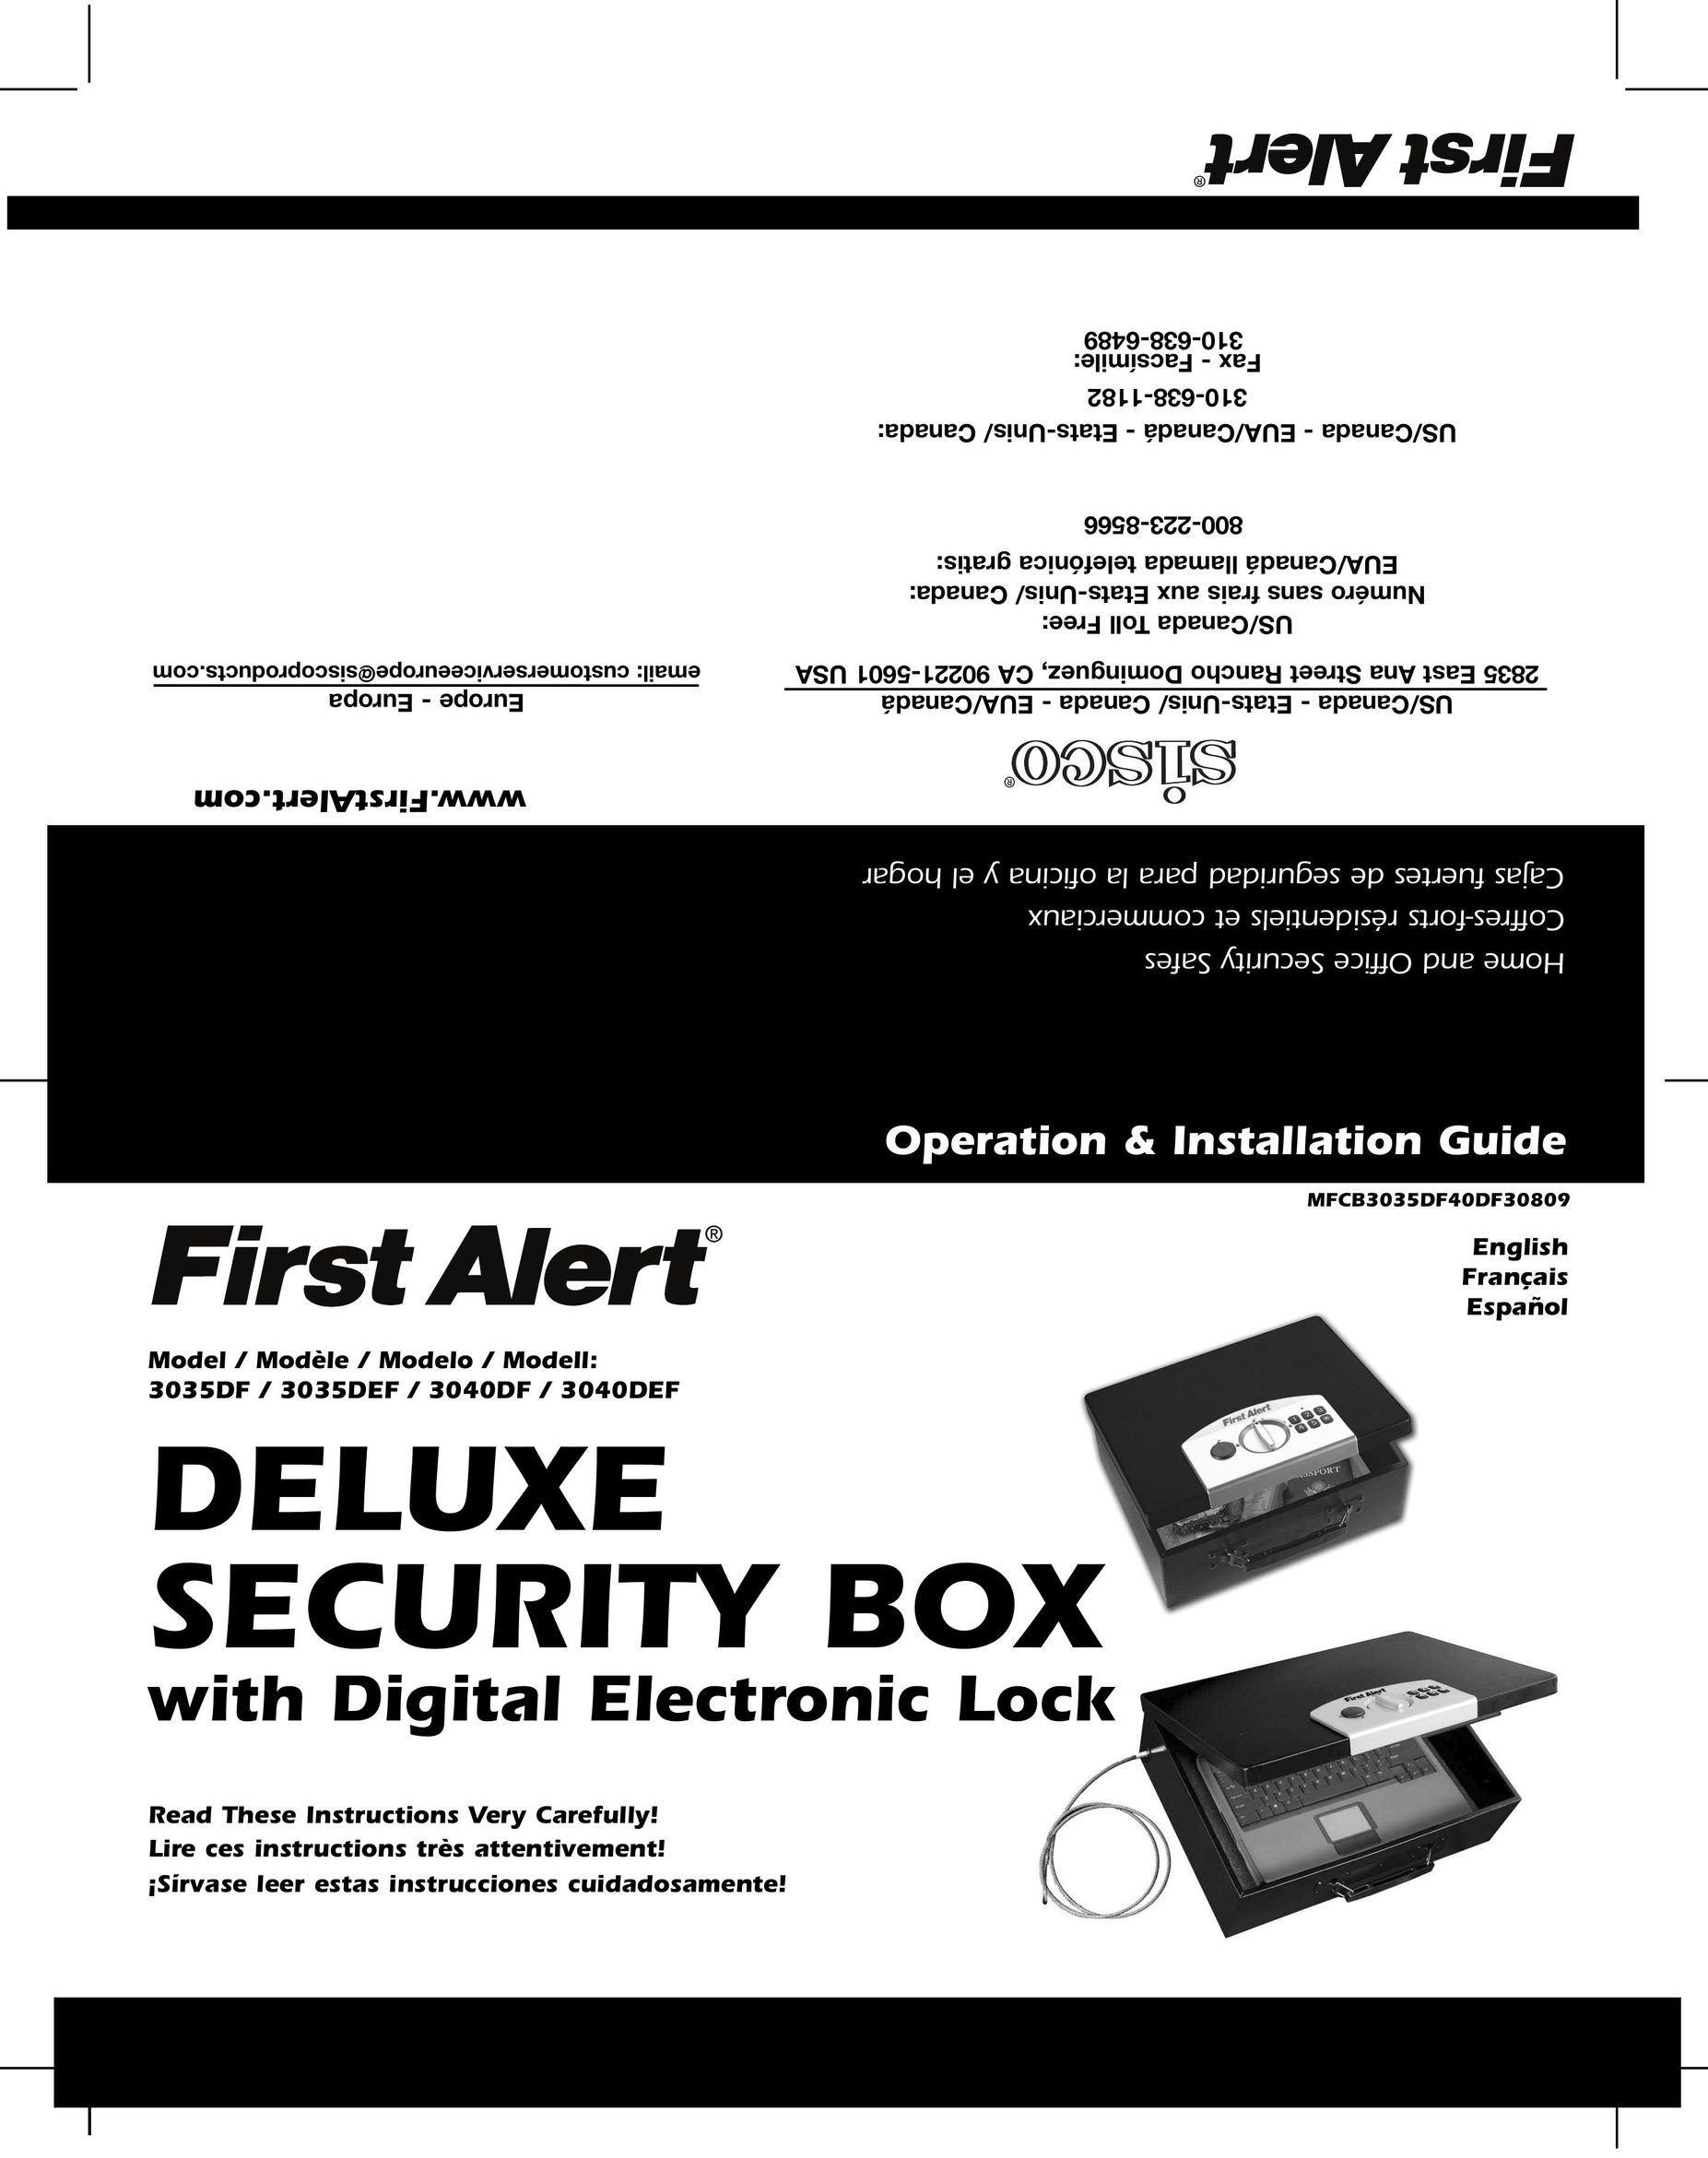 First Alert 3040DEF Home Security System User Manual